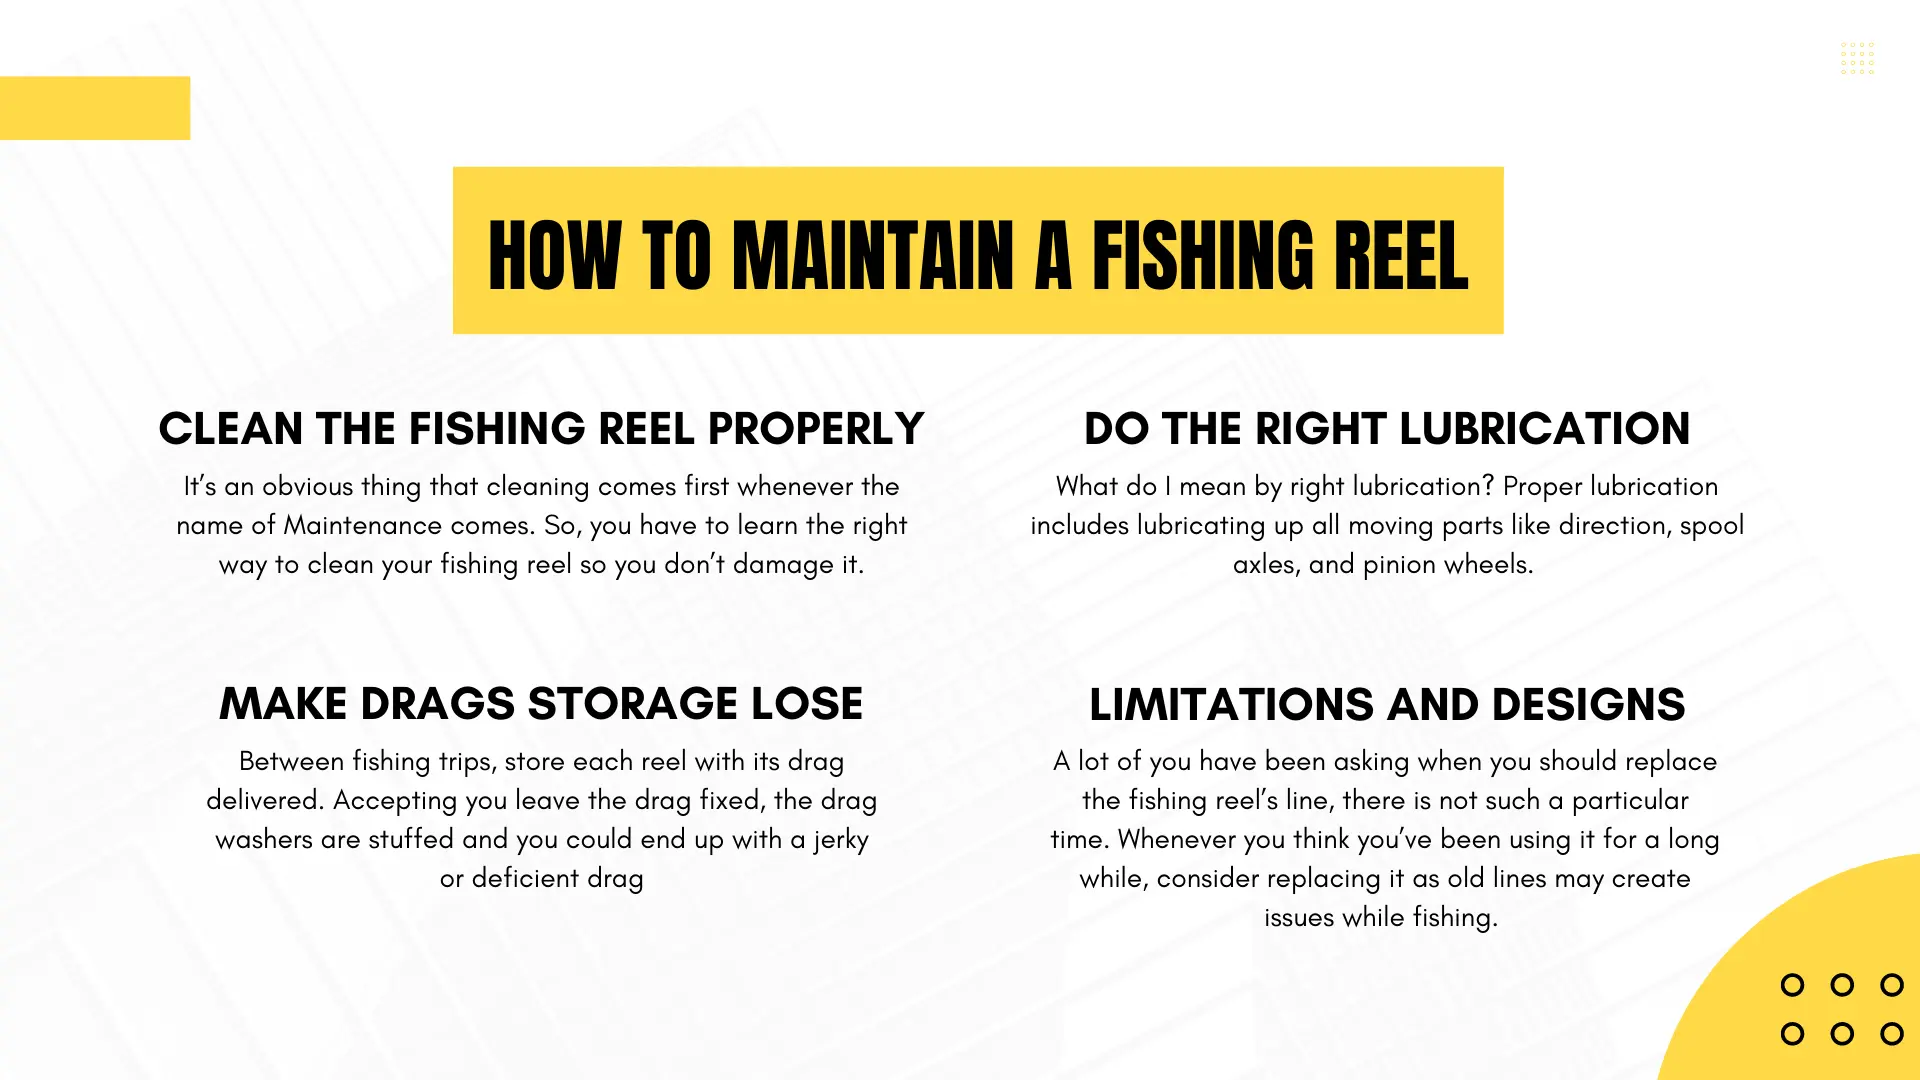 Steps to Maintain a fishing reel